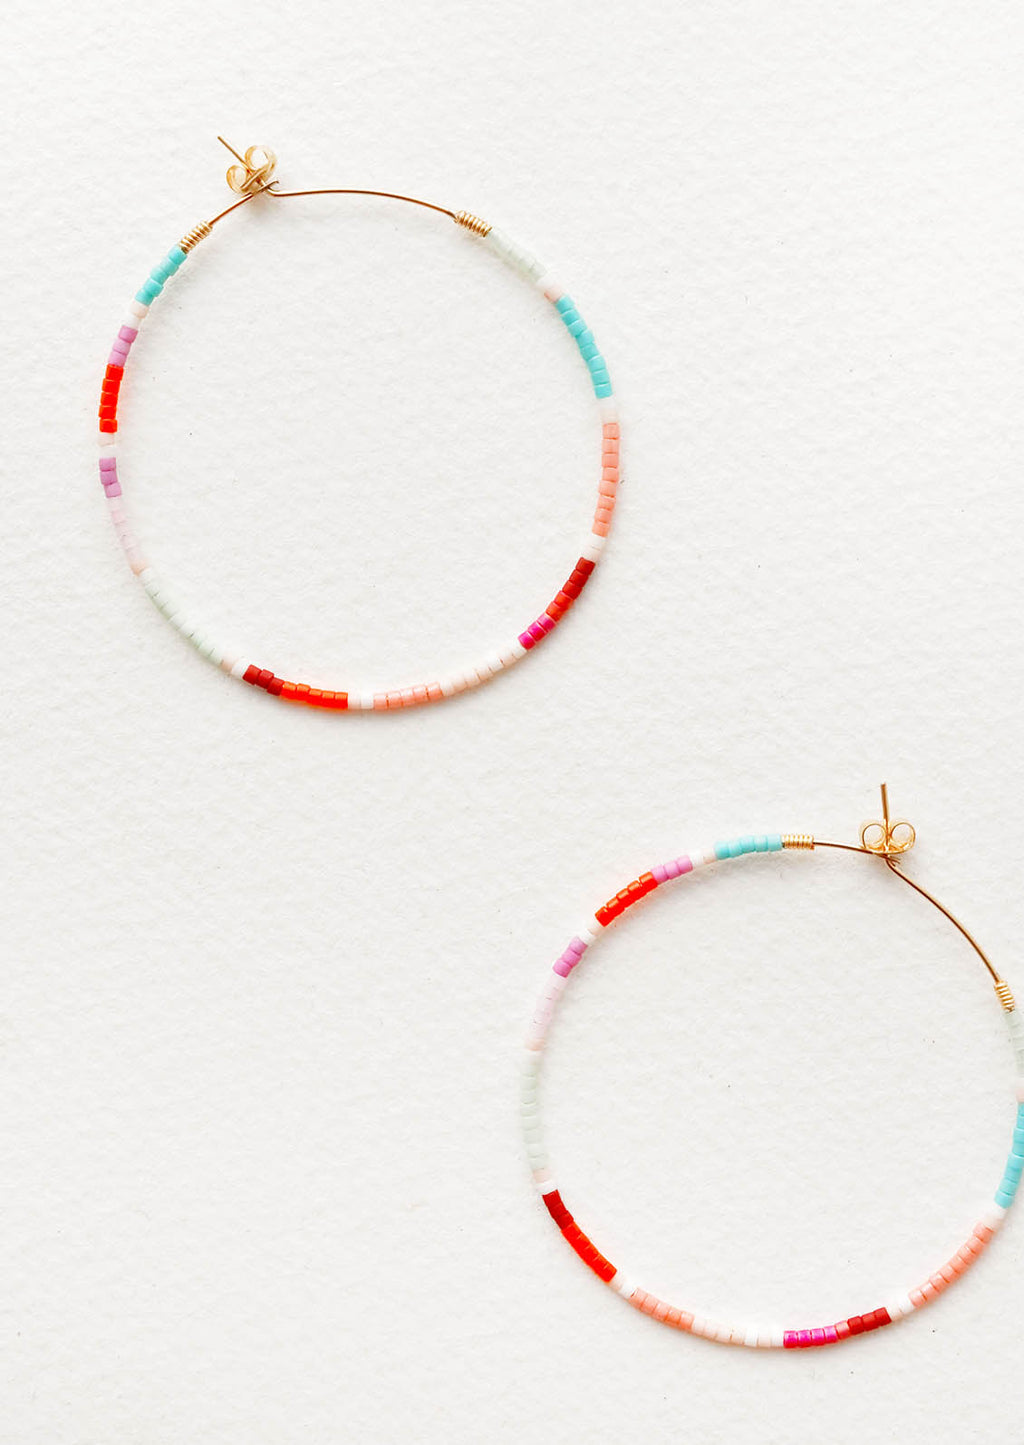 1: Delicate beaded hoop earrings of blue, orange, pink, white, and red glass beads on thin gold wire.